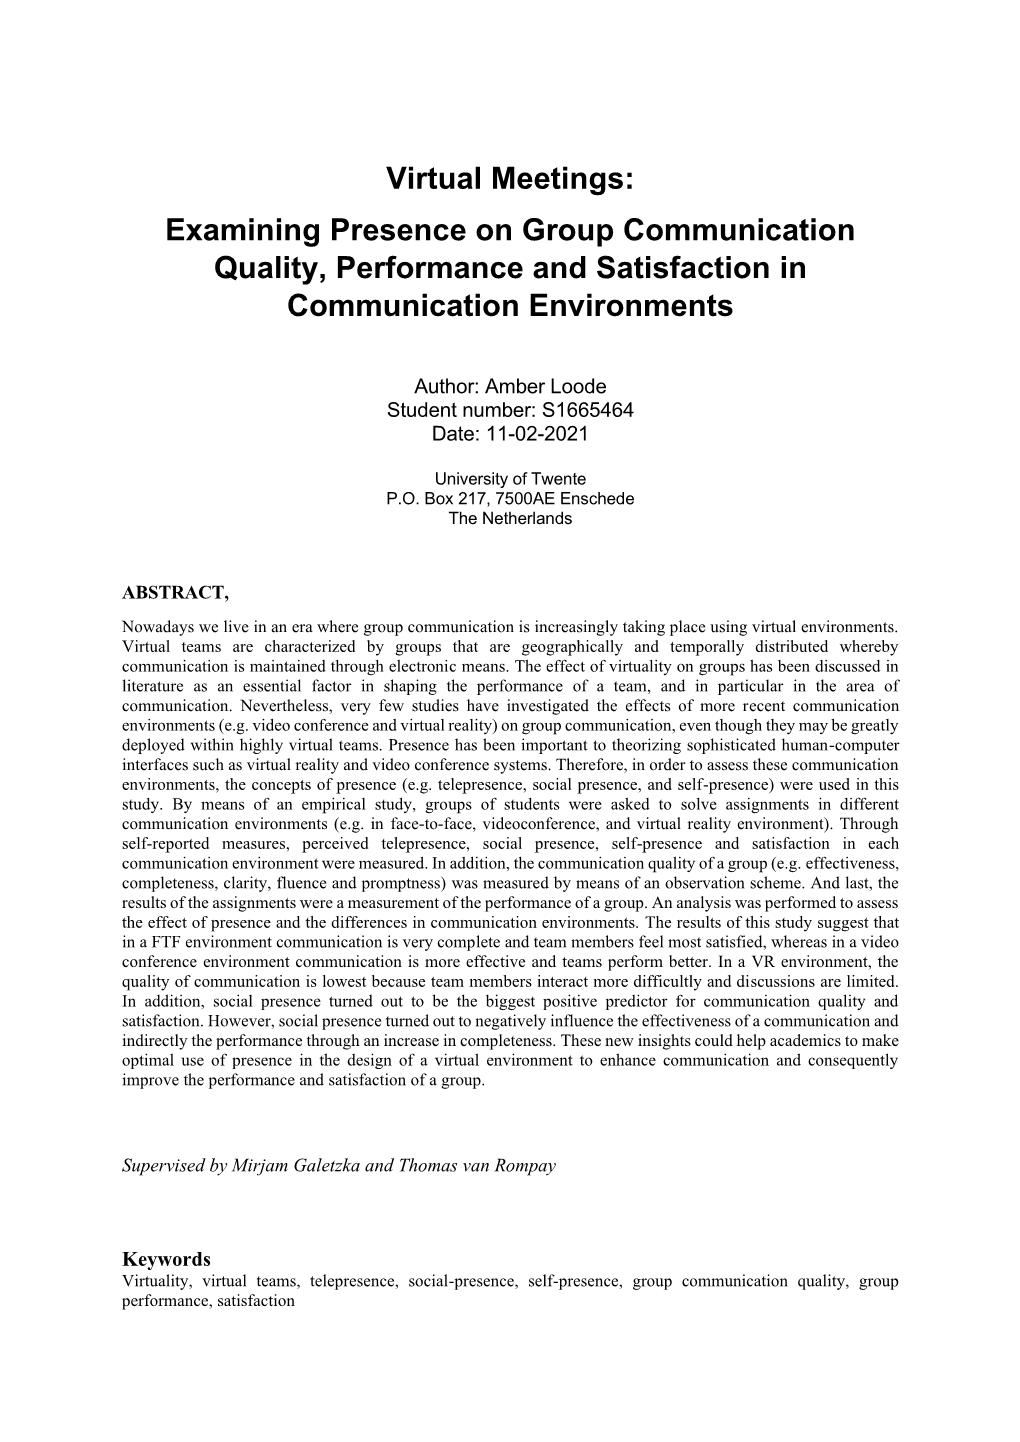 Virtual Meetings: Examining Presence on Group Communication Quality, Performance and Satisfaction in Communication Environments